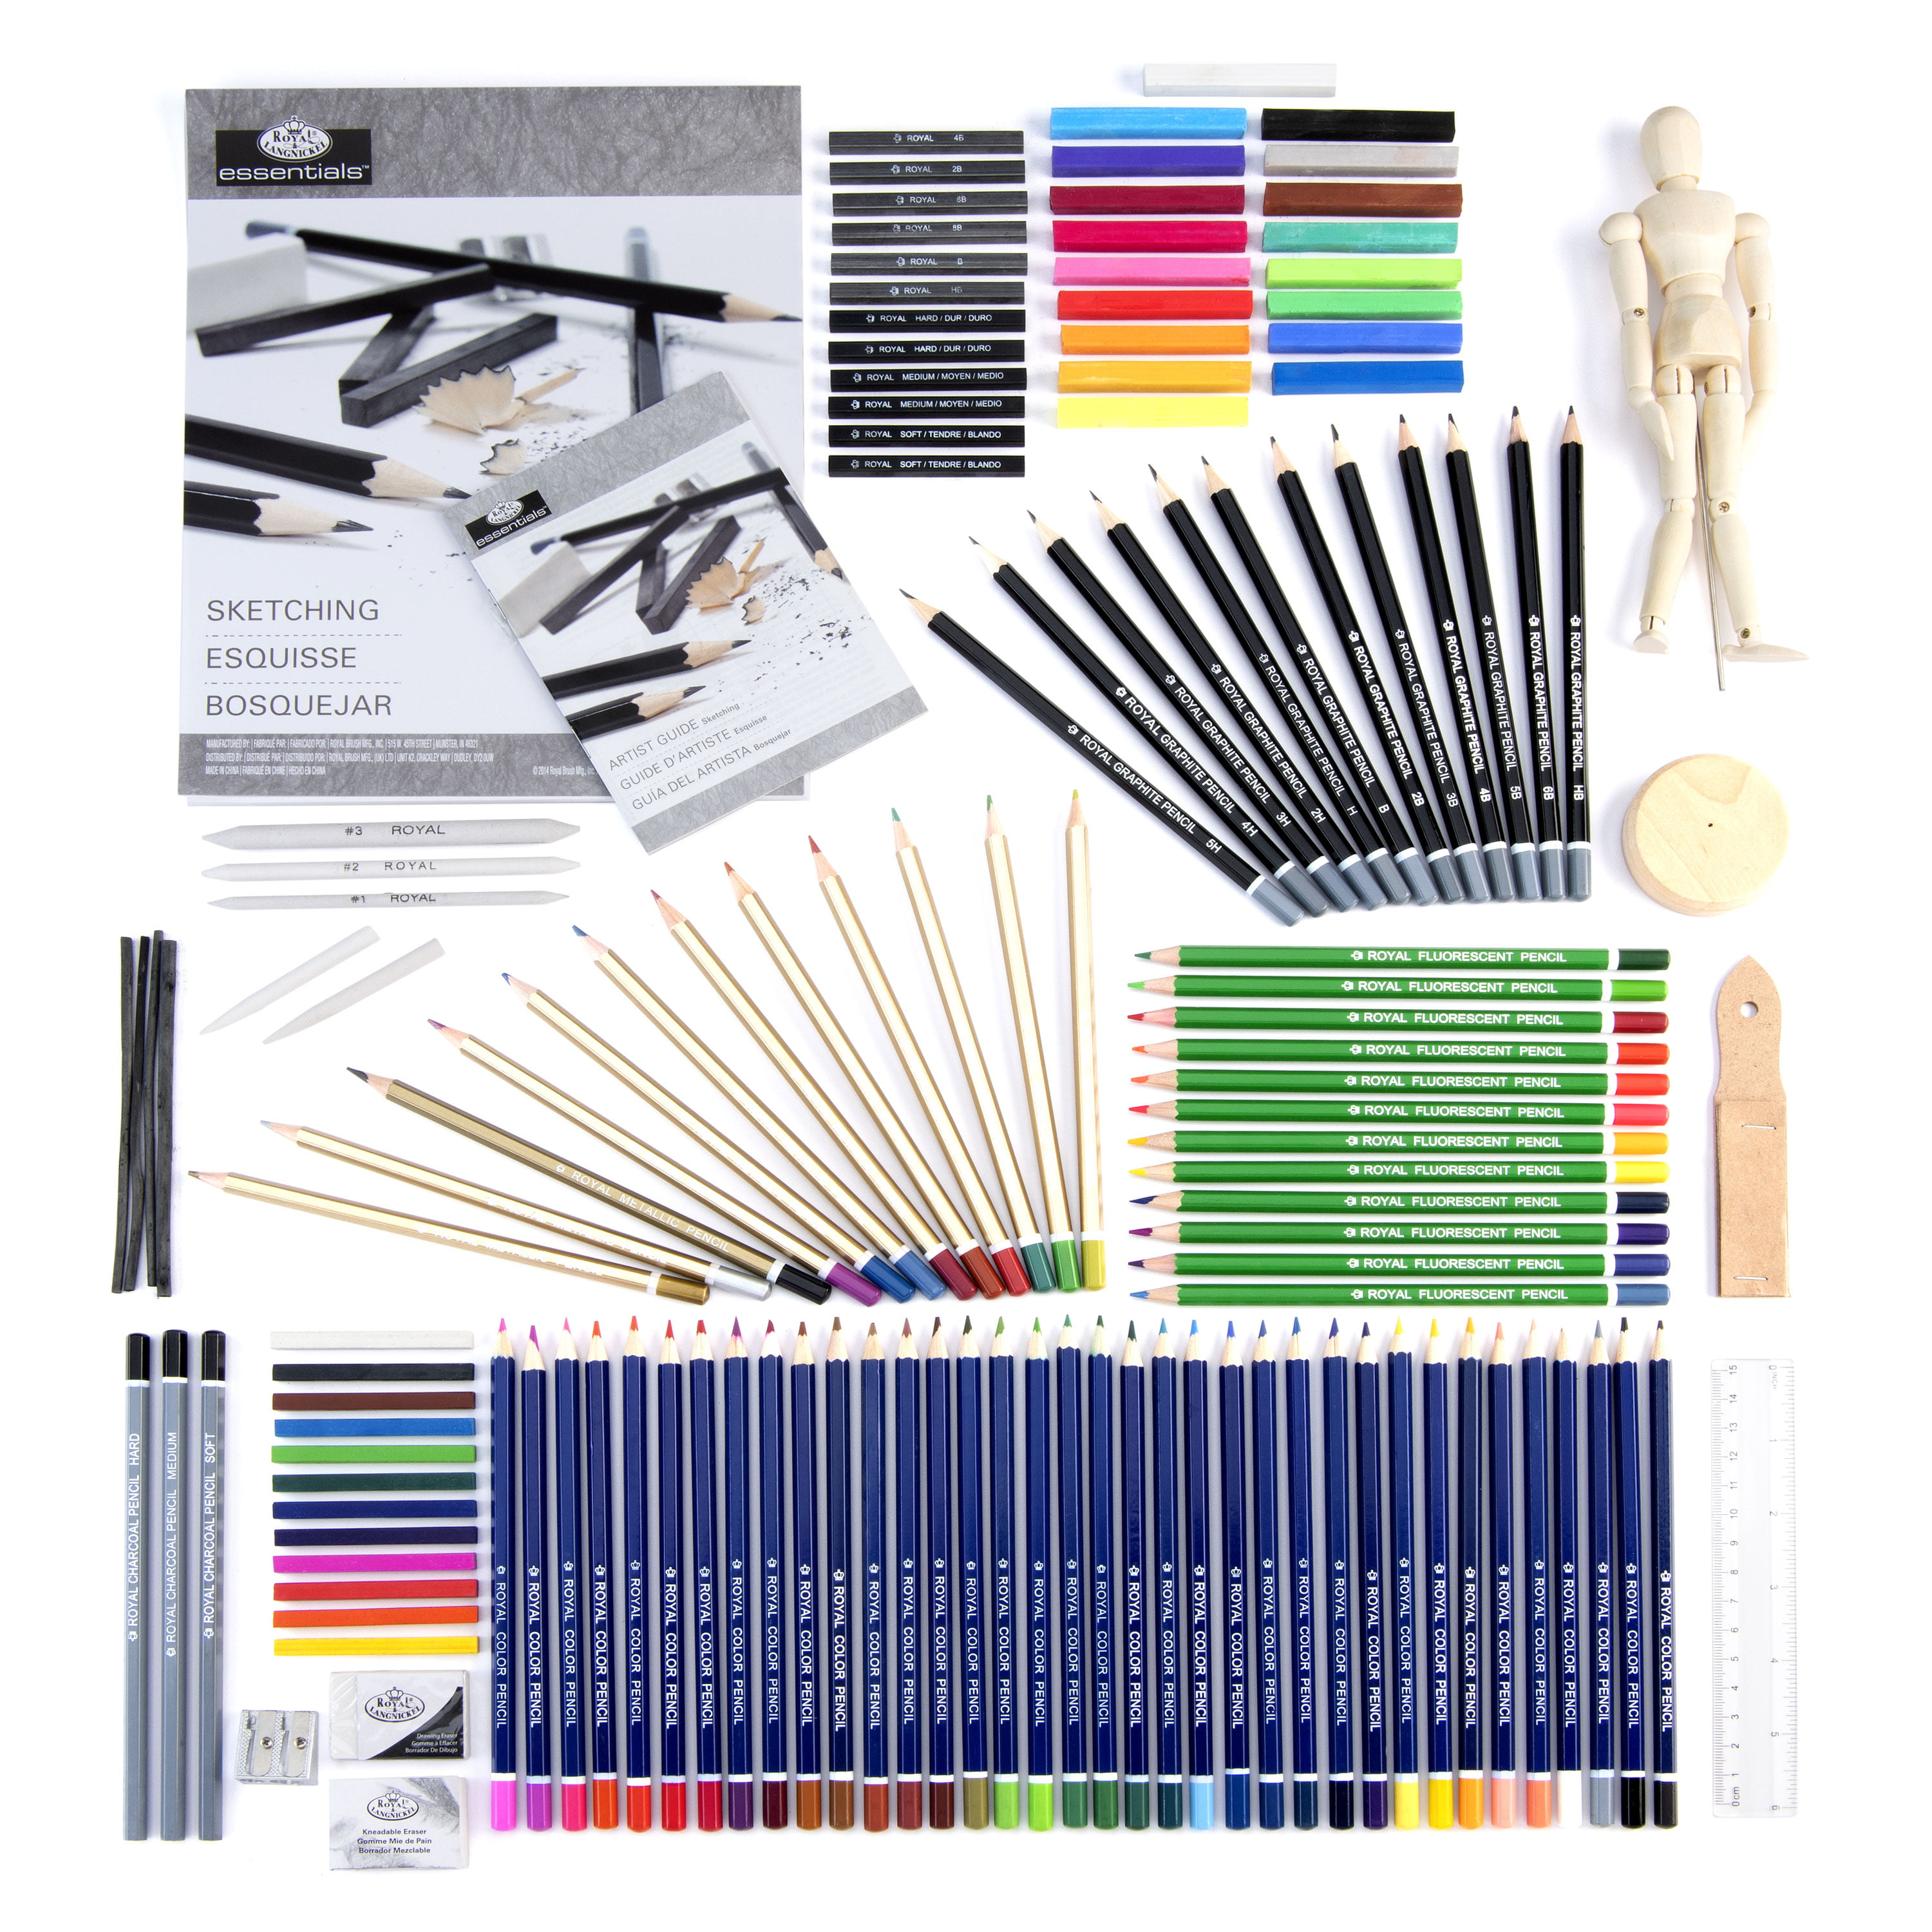 Sketching & Drawing Set for Beginners W Moveable Figurine and Pink Carry  Case, Royal Color Pencils and Assorted Tools, Most Still in Wrapper 